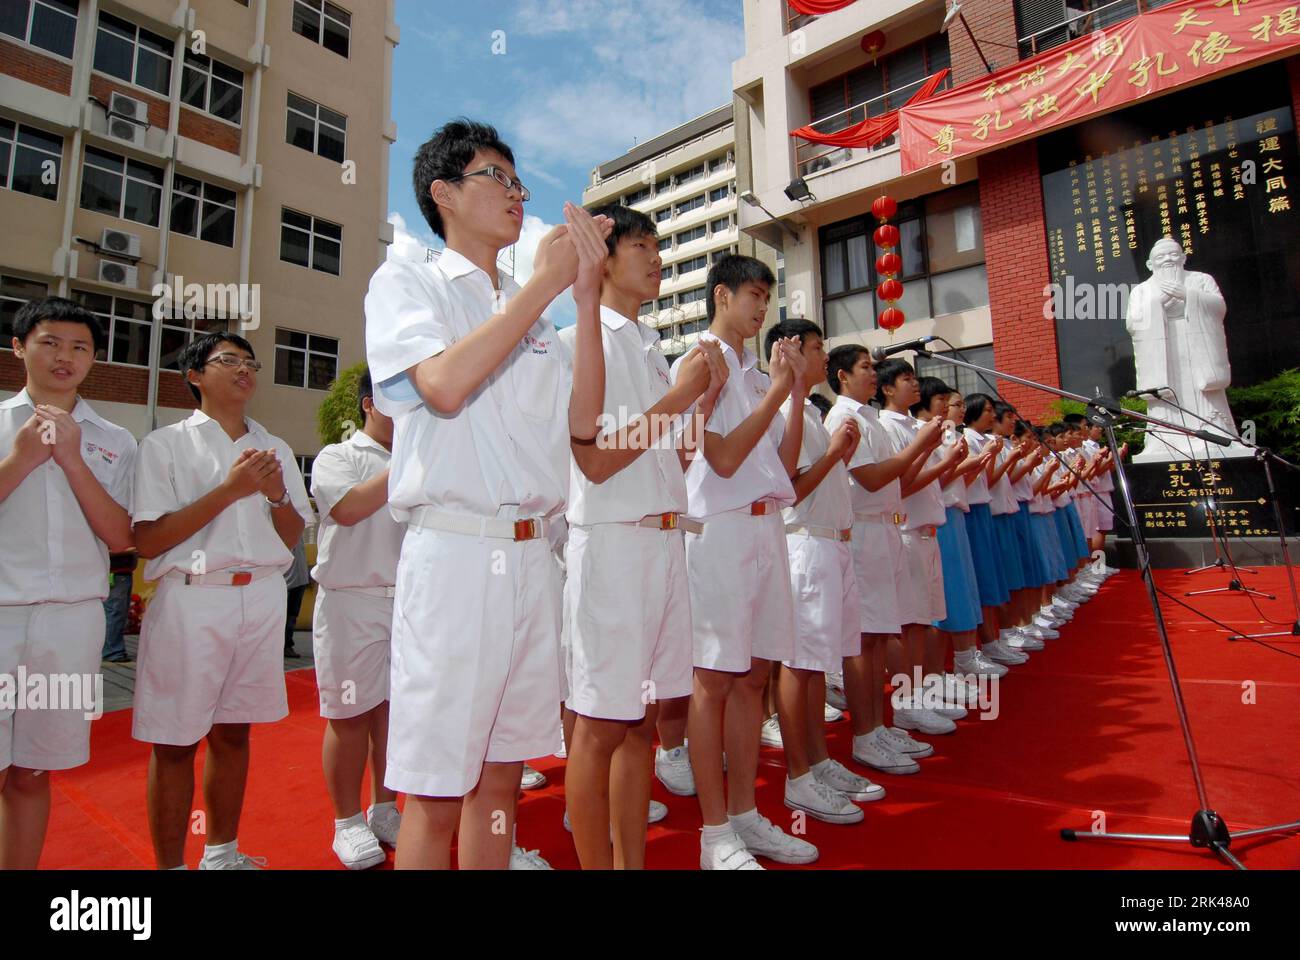 Bildnummer: 53599468  Datum: 15.11.2009  Copyright: imago/Xinhua (091115) -- KUALA LUMPUR, Nov. 15, 2009 (Xinhua) -- Students recite Lunyu (or Analects of Confucius) by ancient educator and thinker Confucius (551 BC-479 BC) during the unveiling ceremony for the statue of Confucius at Confucian Provate Secondary School in Kuala Lumpur, Malaysia, Nov. 15, 2009. The school held the ceremony on the occasion of the celebration of 103rd anniversary for its founding. (Xinhua/Chong Voon Chung) (hdt) (2)MALAYSIA-KUALA LUMPUR-SECONDARY SCHOOL-STATUE OF CONFUCIUS PUBLICATIONxNOTxINxCHN Gesellschaft Schul Stock Photo